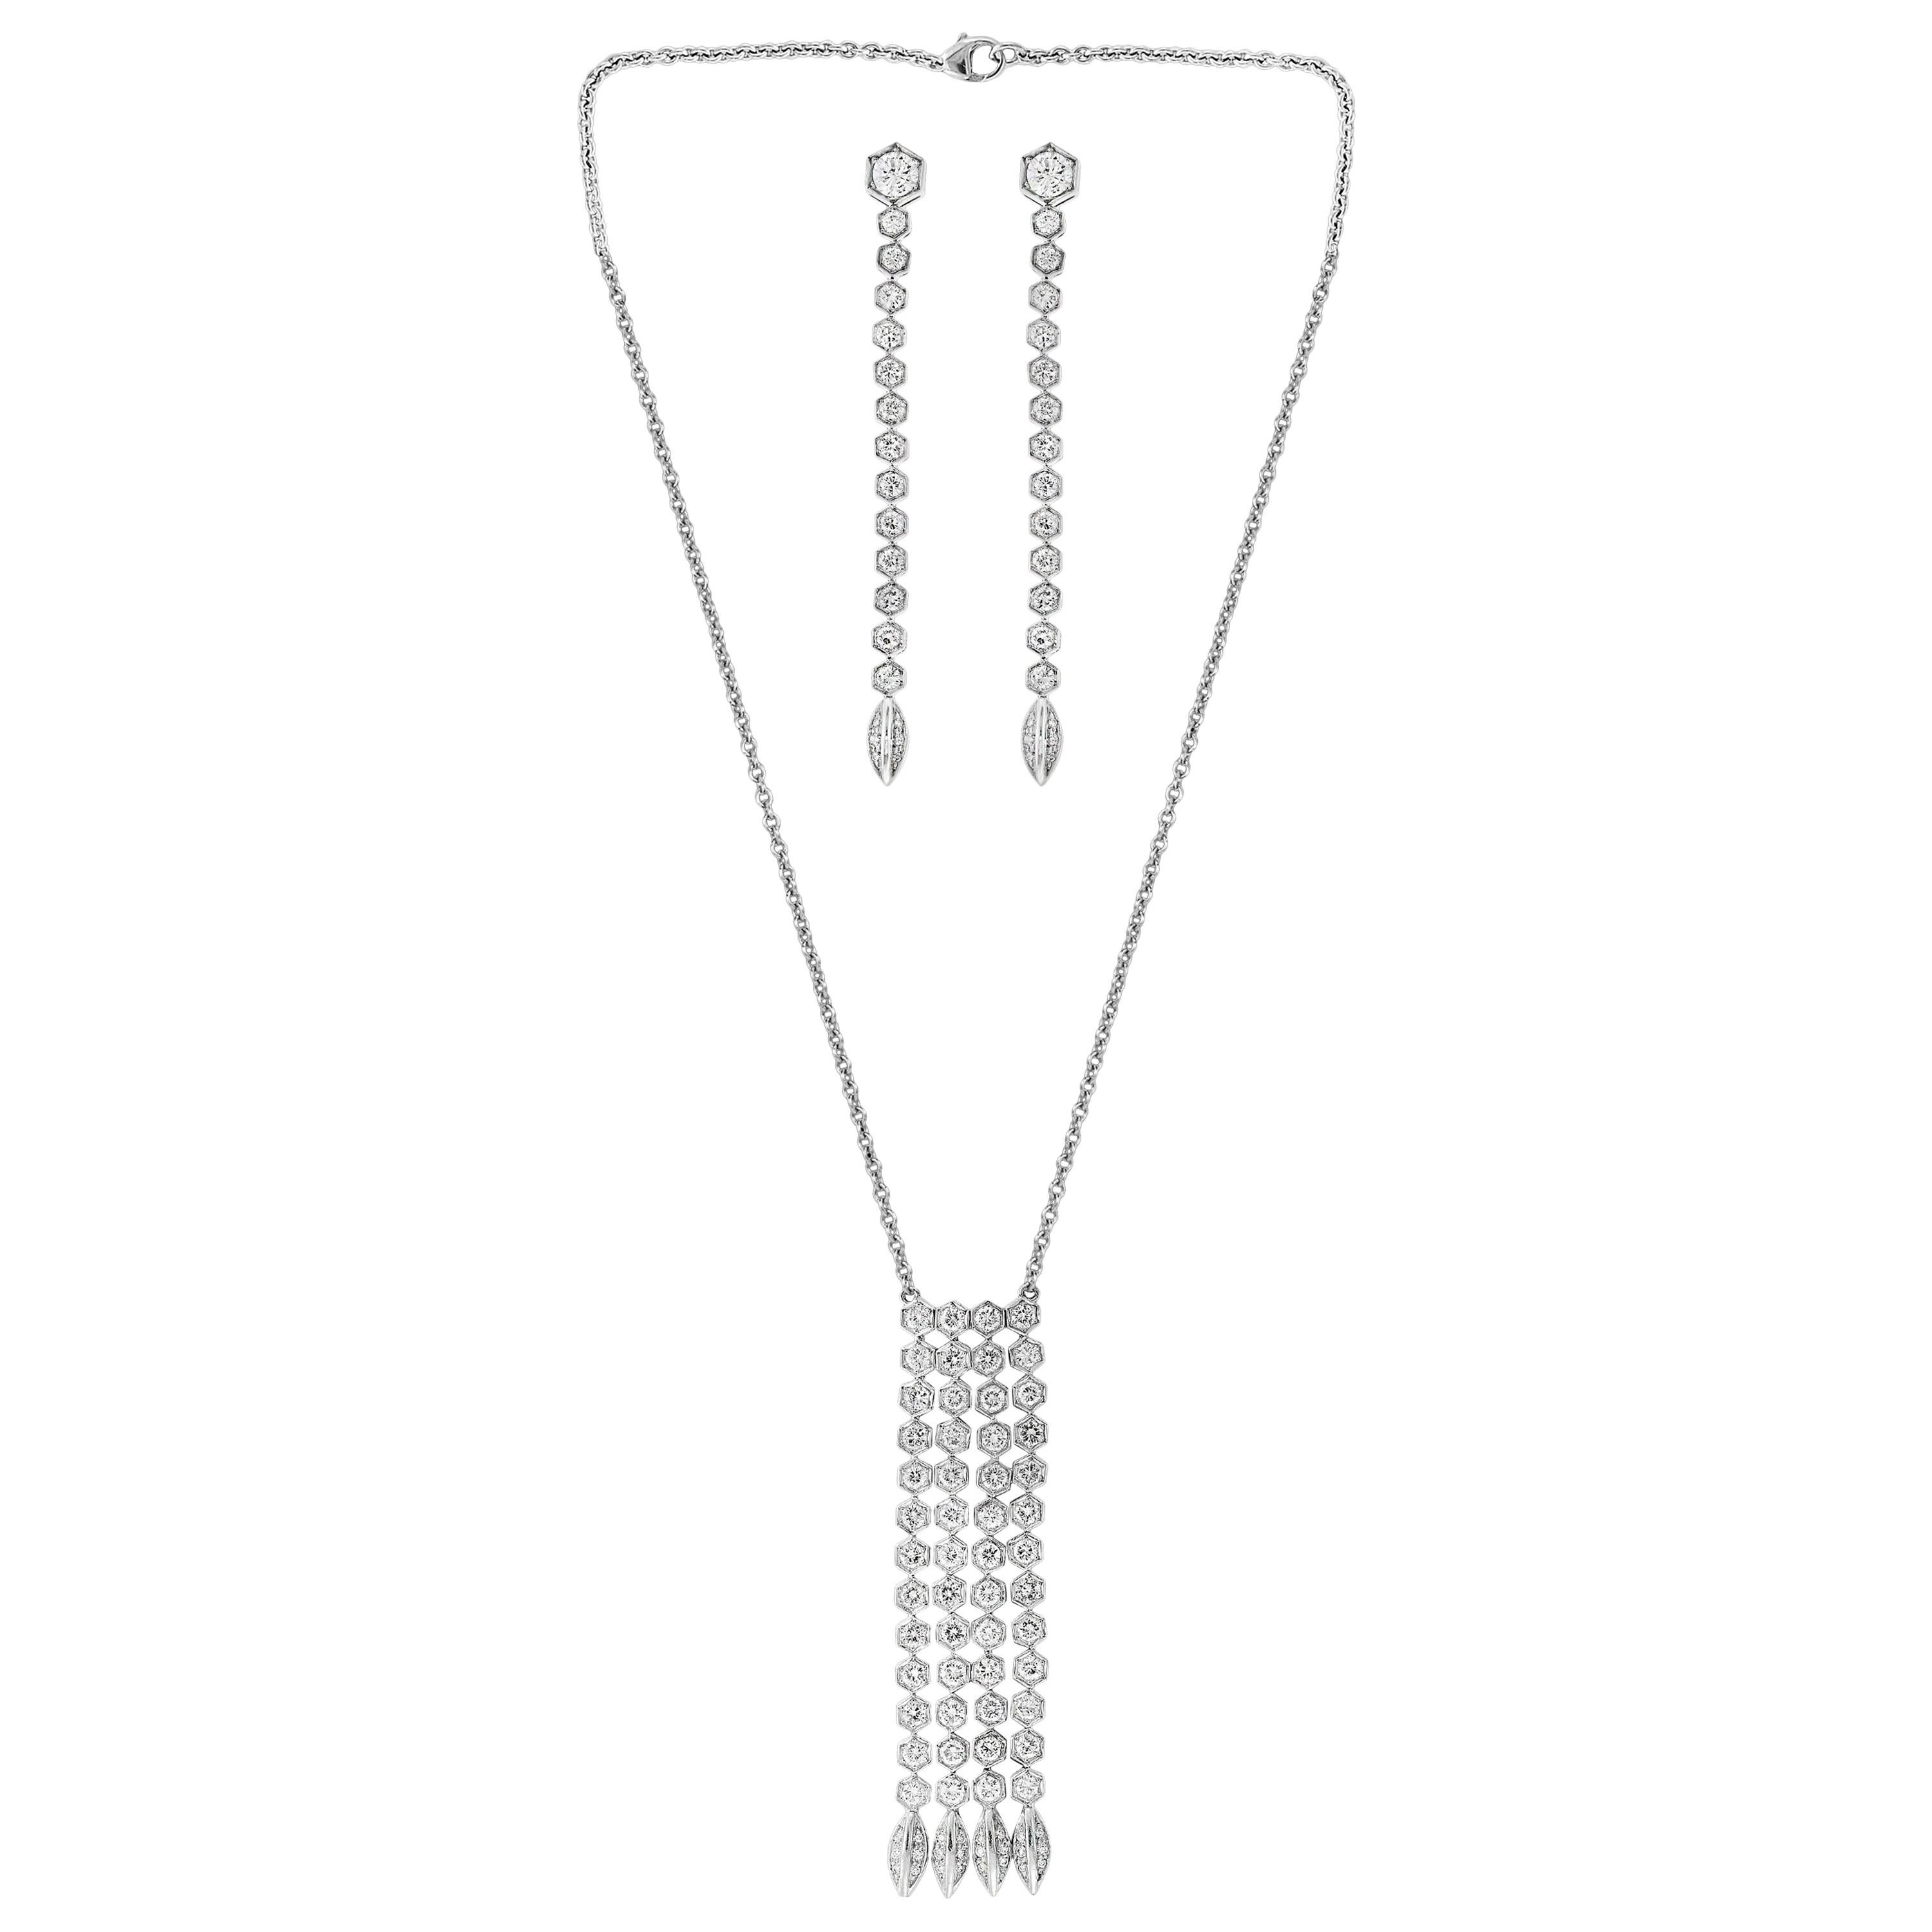 12 Carat Diamond Line Necklace and Line Earring Suite in 18 Karat White Gold